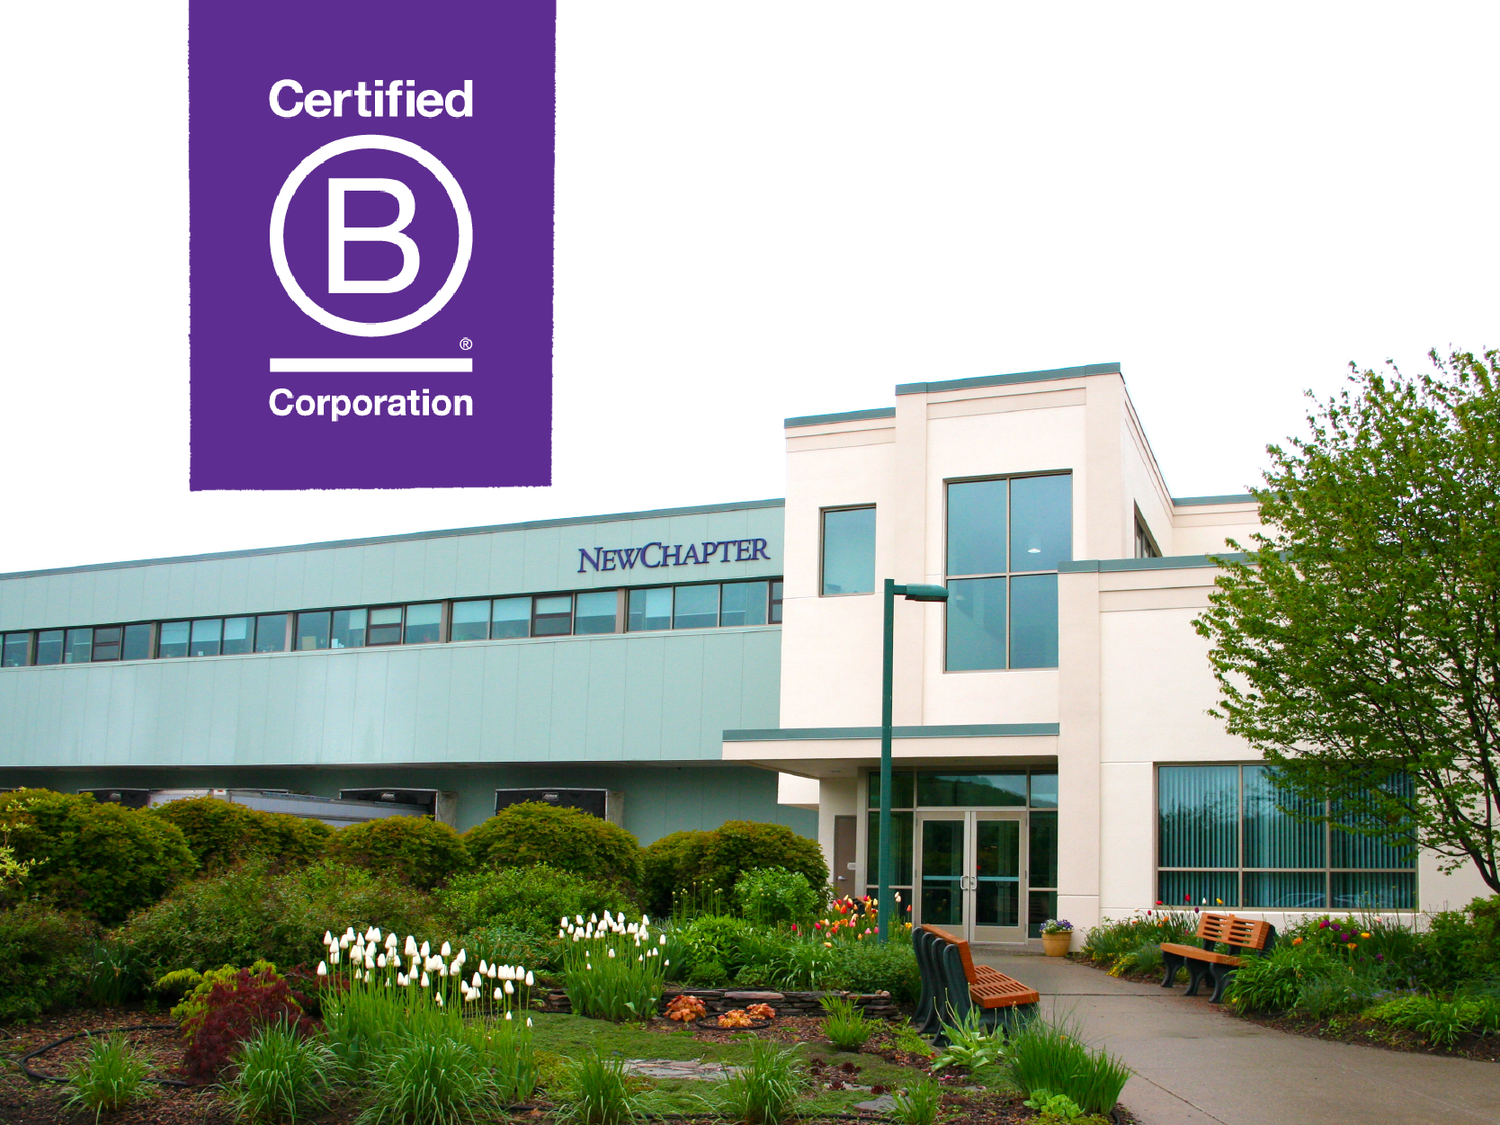 Why is New Chapter a Certified B Corporation™?